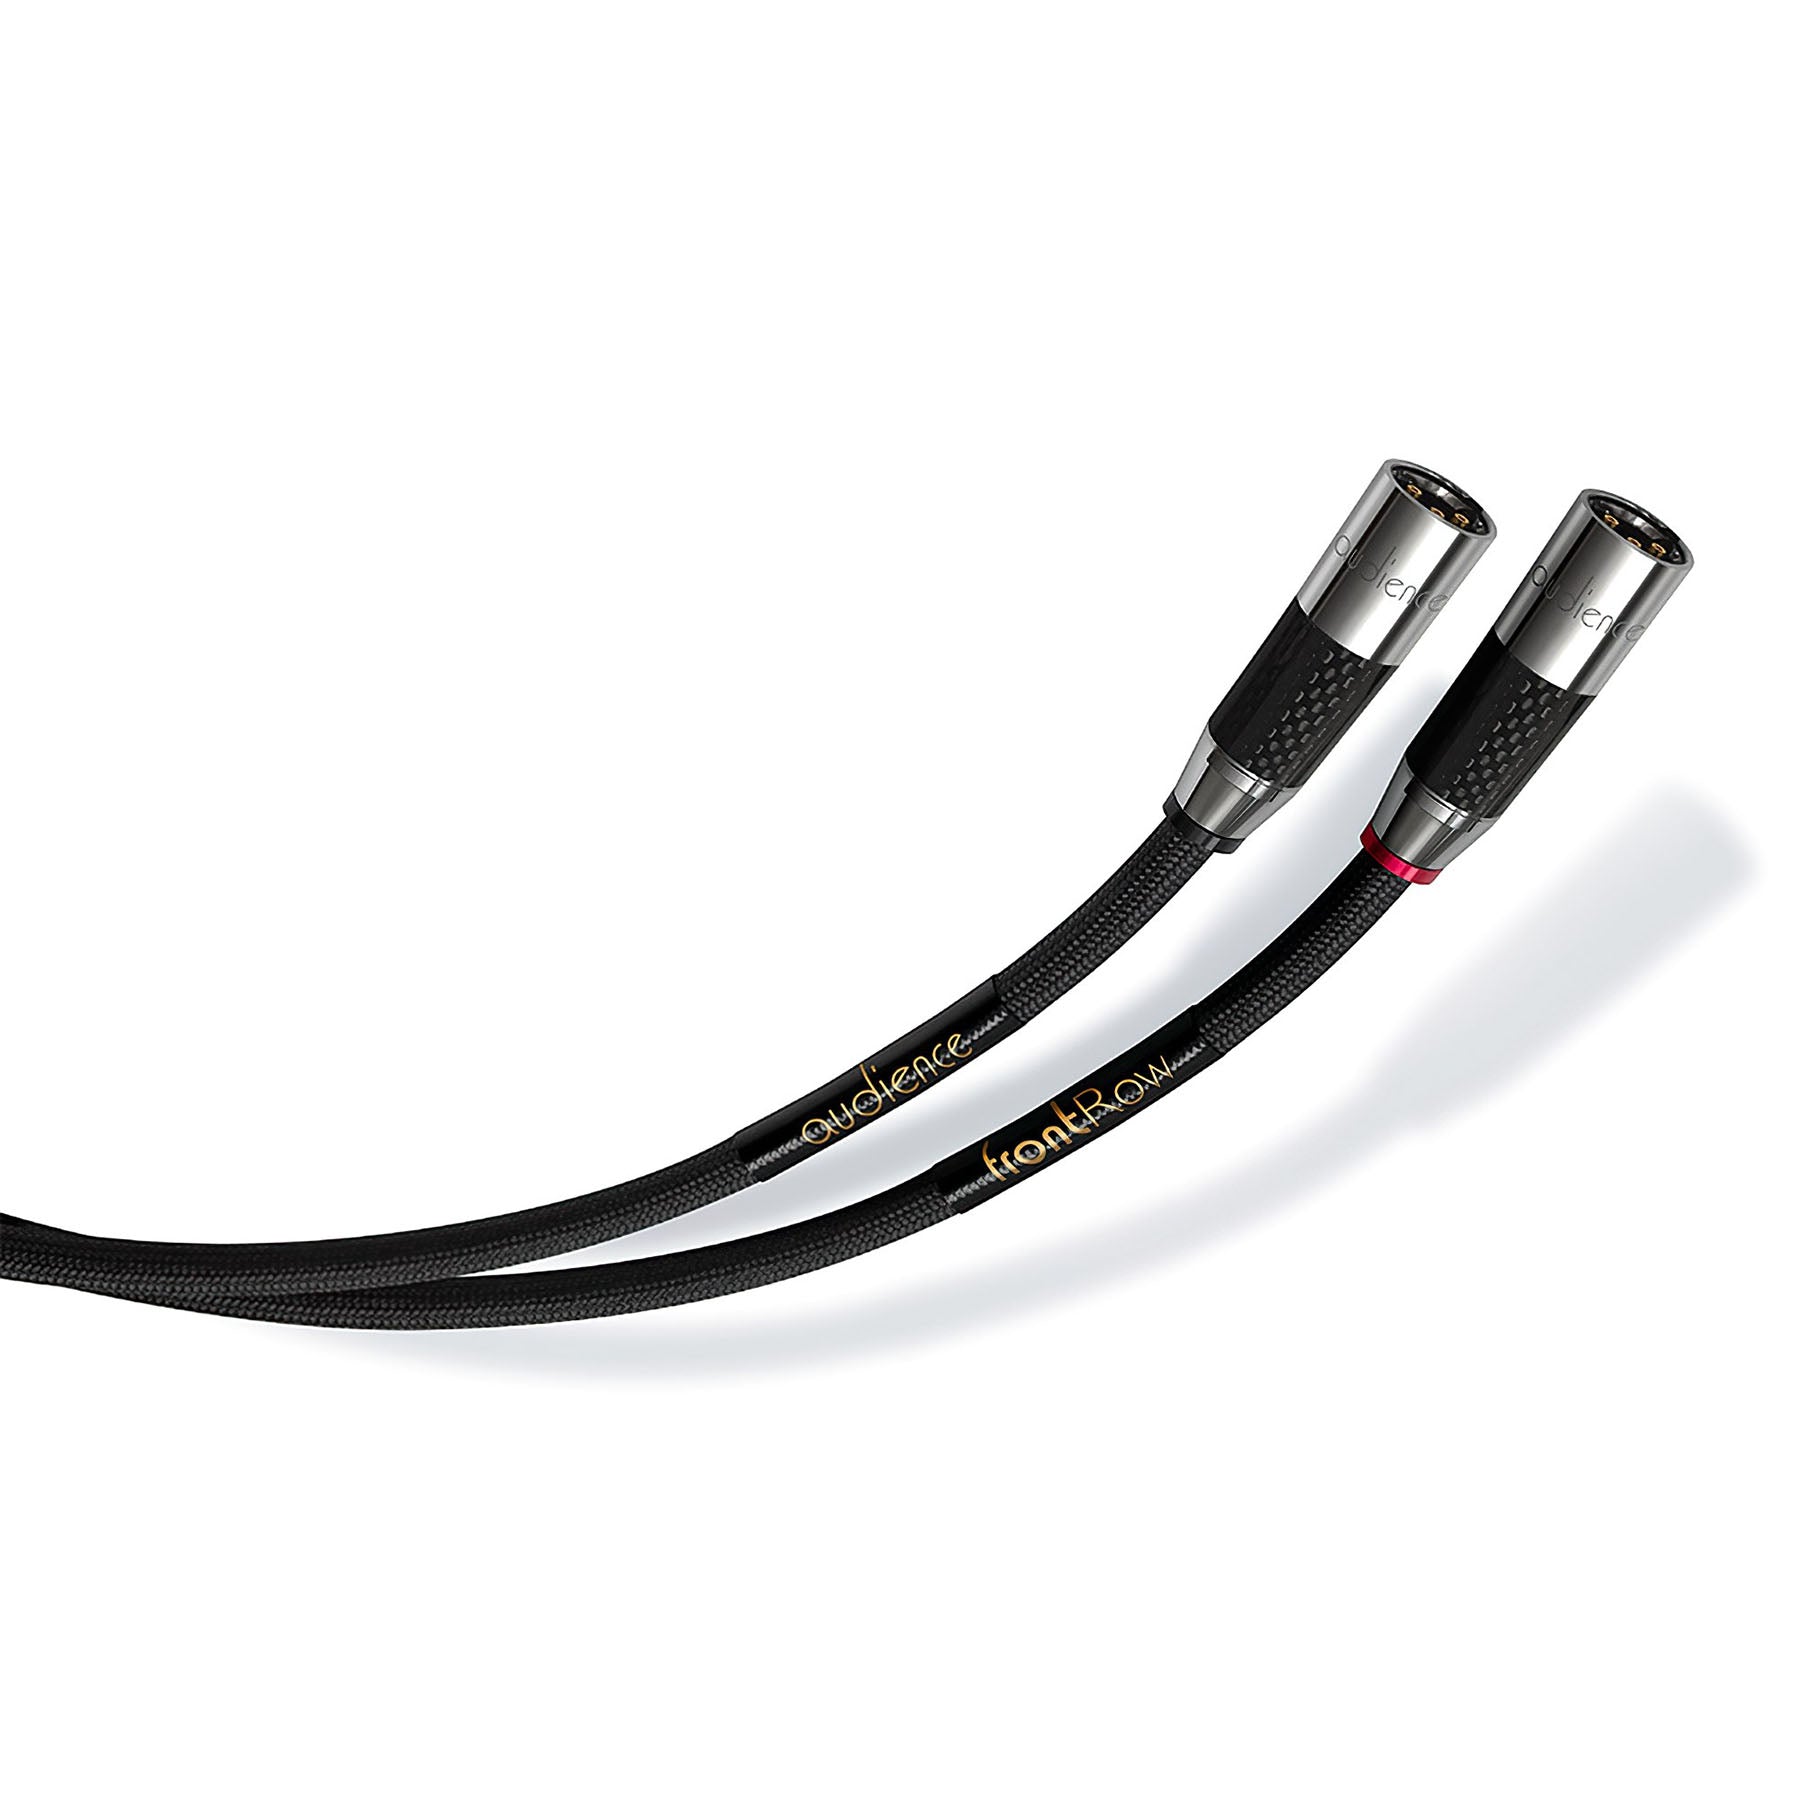 Audience frontRow Statement XLR Interconnect Cables (pair)